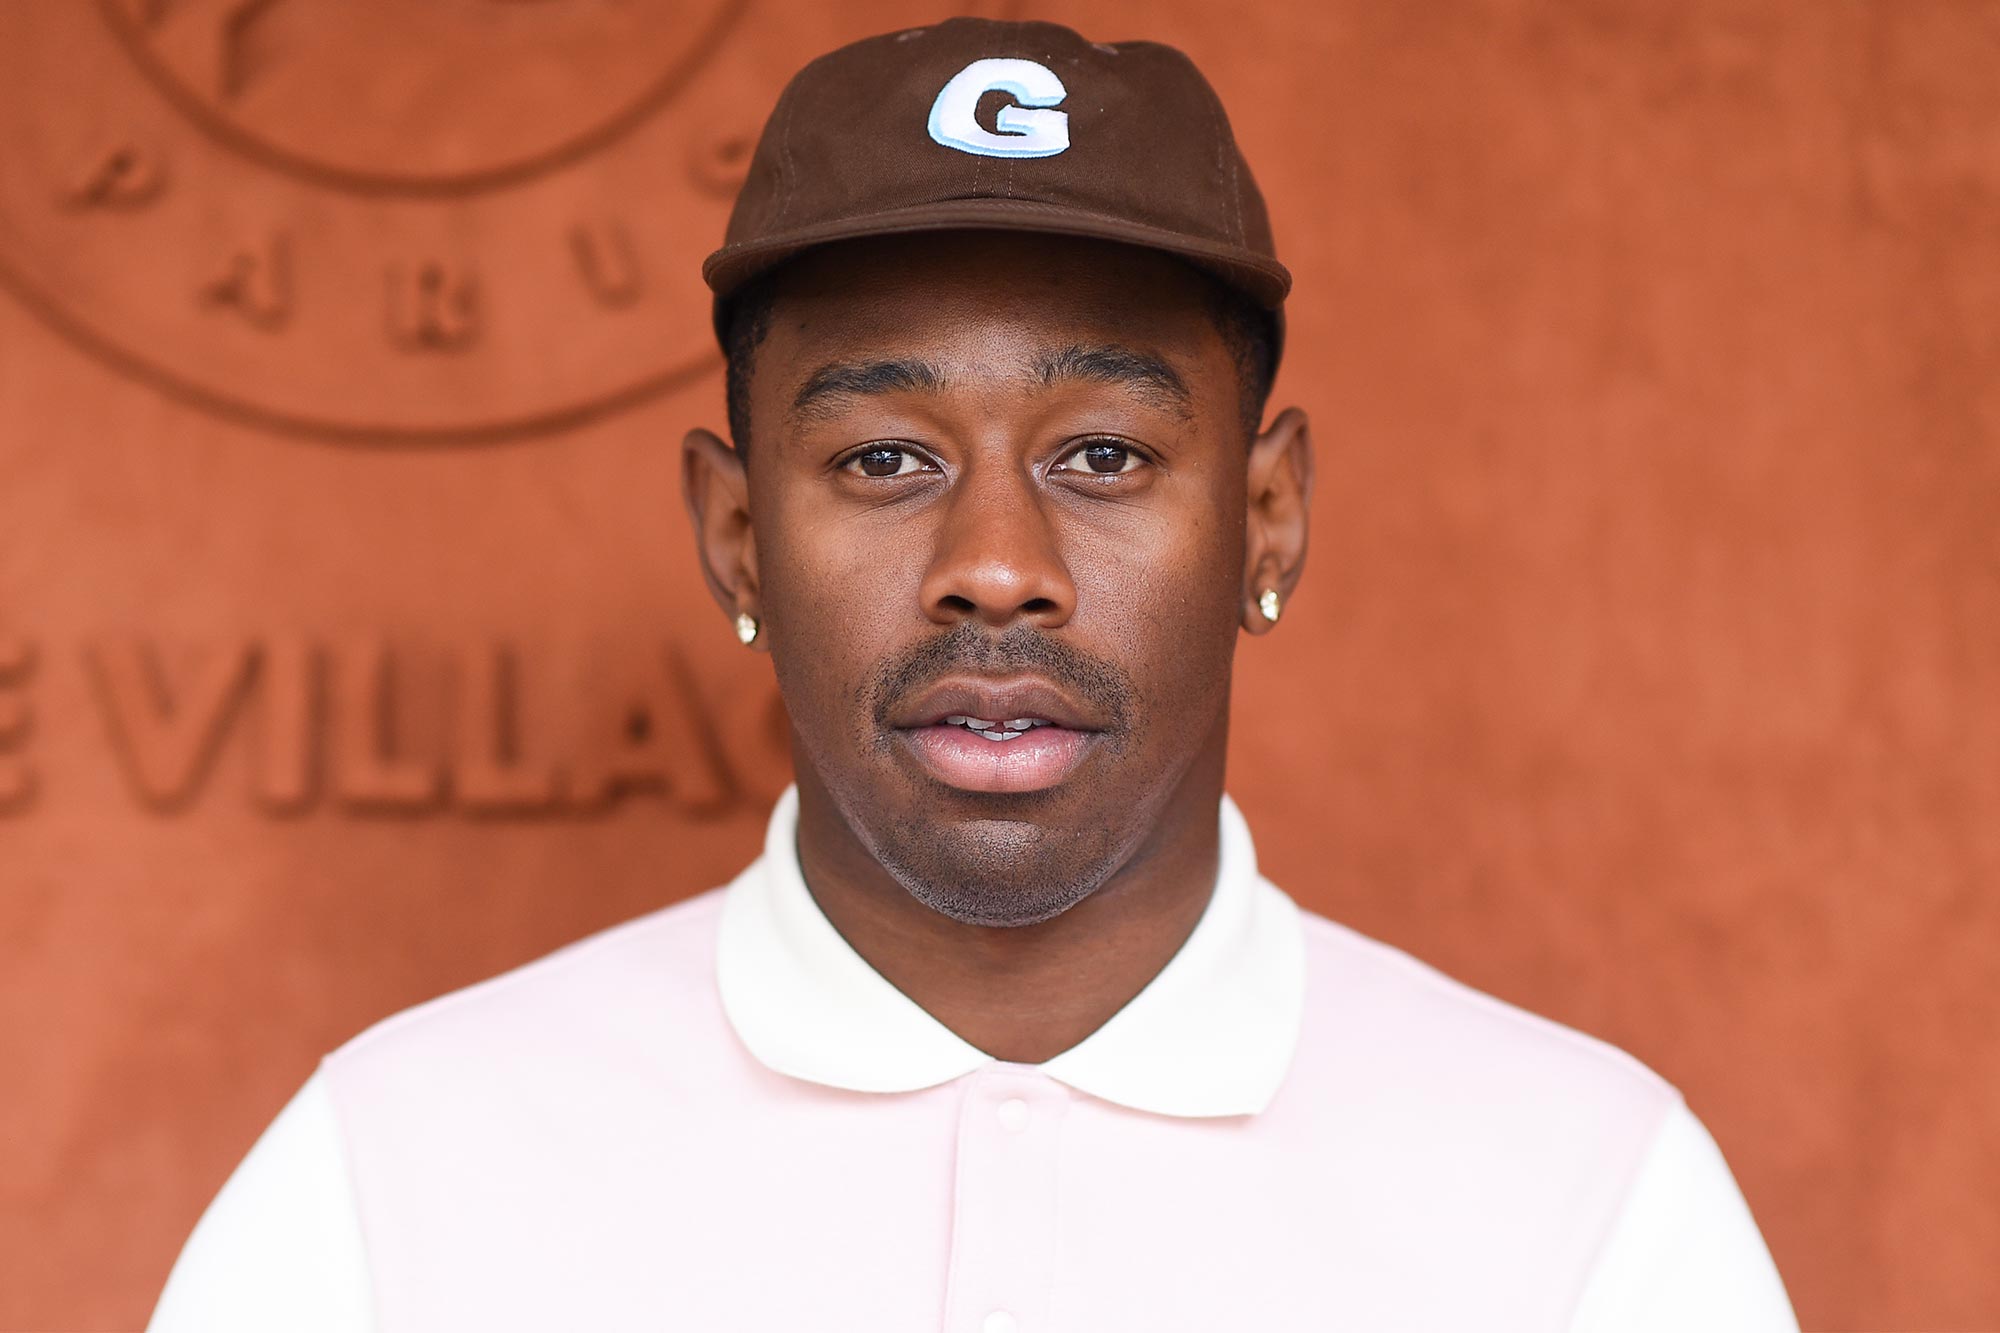 To see what the rapper Tyler The Creator wears, visit Drew Merch and Full Sent Merch here